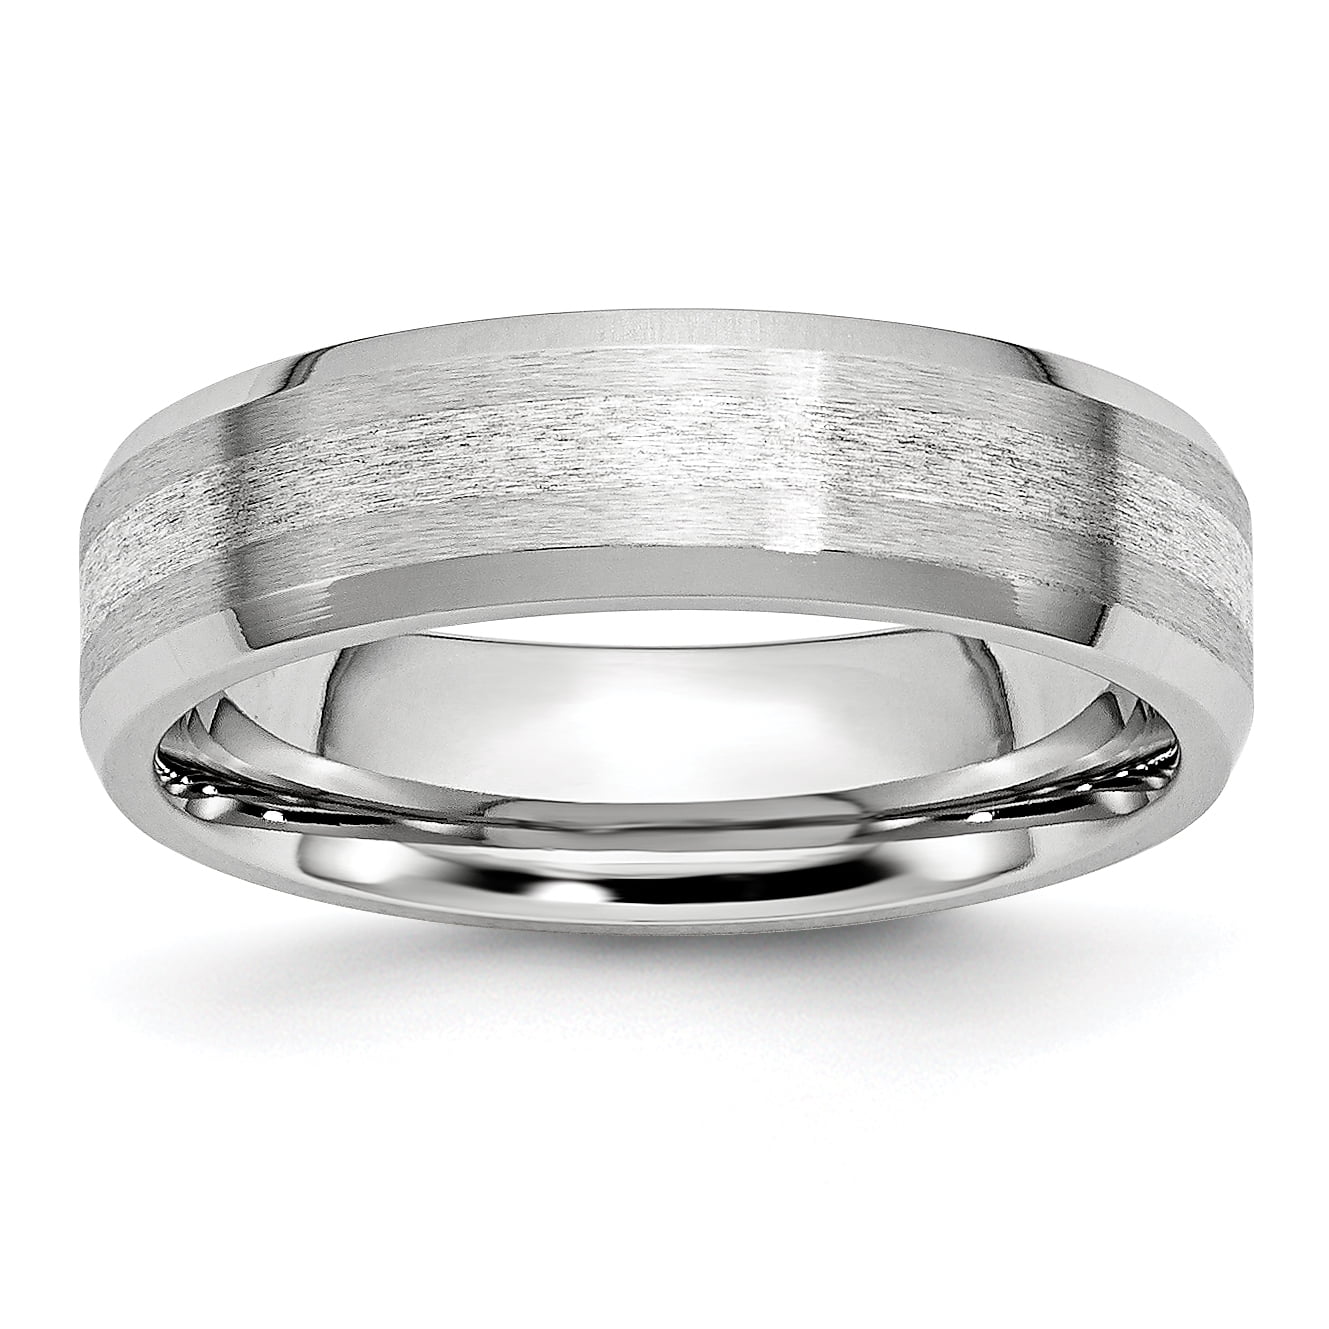 Best Quality Free Gift Box Cobalt Sterling Silver Inlay Satin/polished 6mm Beveled Edge Band